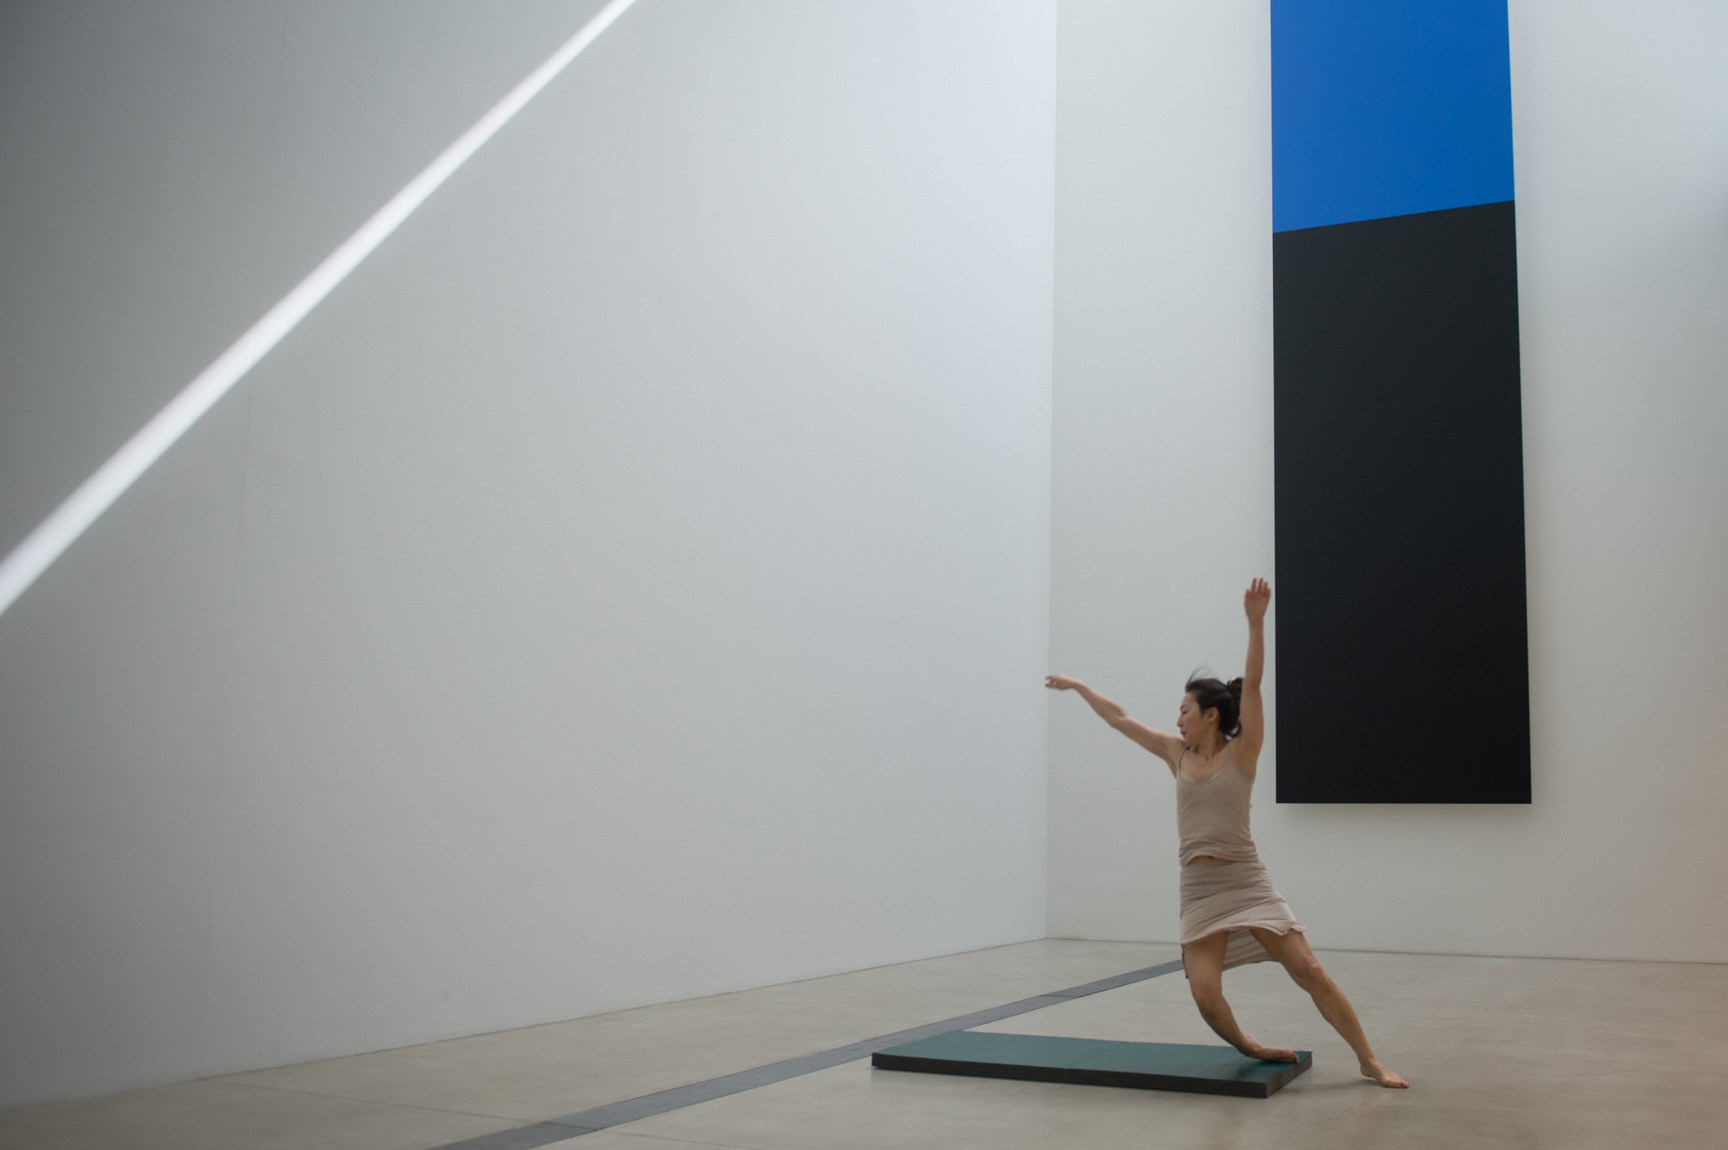 An AUNTS dancer wearing a flesh tone outfit performs in front of Ellsworth Kelly's "Blue Black" with a black crash mat.